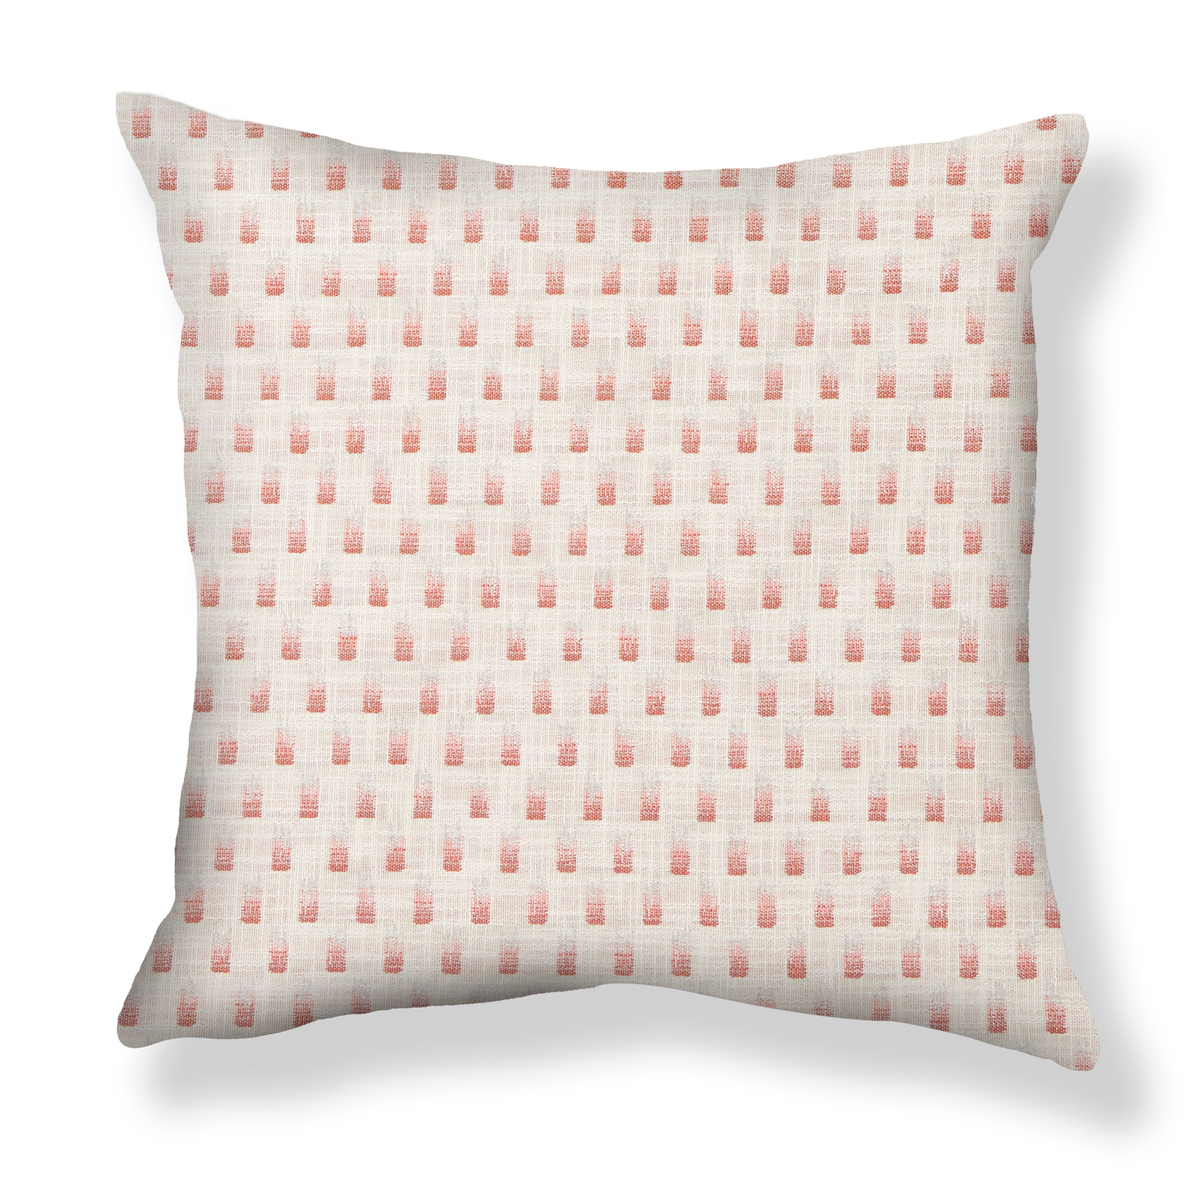 Raindrops Pillow in Pink